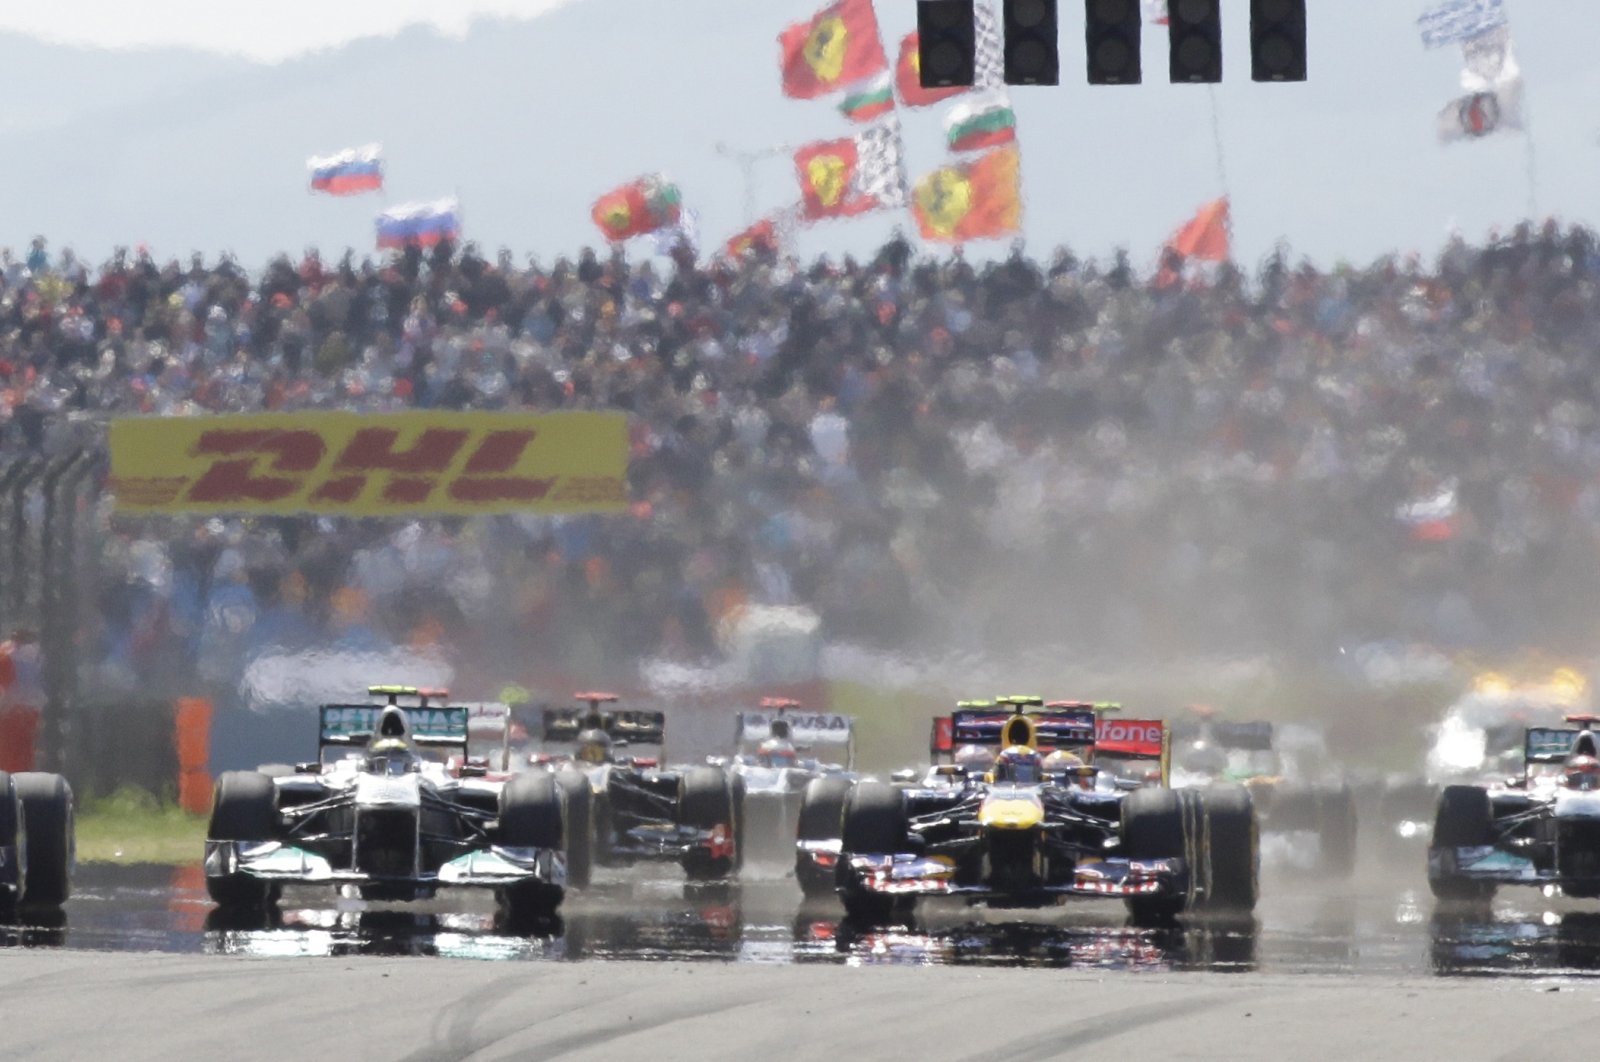 Red Bull driver Sebastian Vettel leads the field after the start of the Formula One Turkish Grand Prix at the Istanbul Park racetrack, in Istanbul, Turkey, May 8, 2011. (AP Photo)